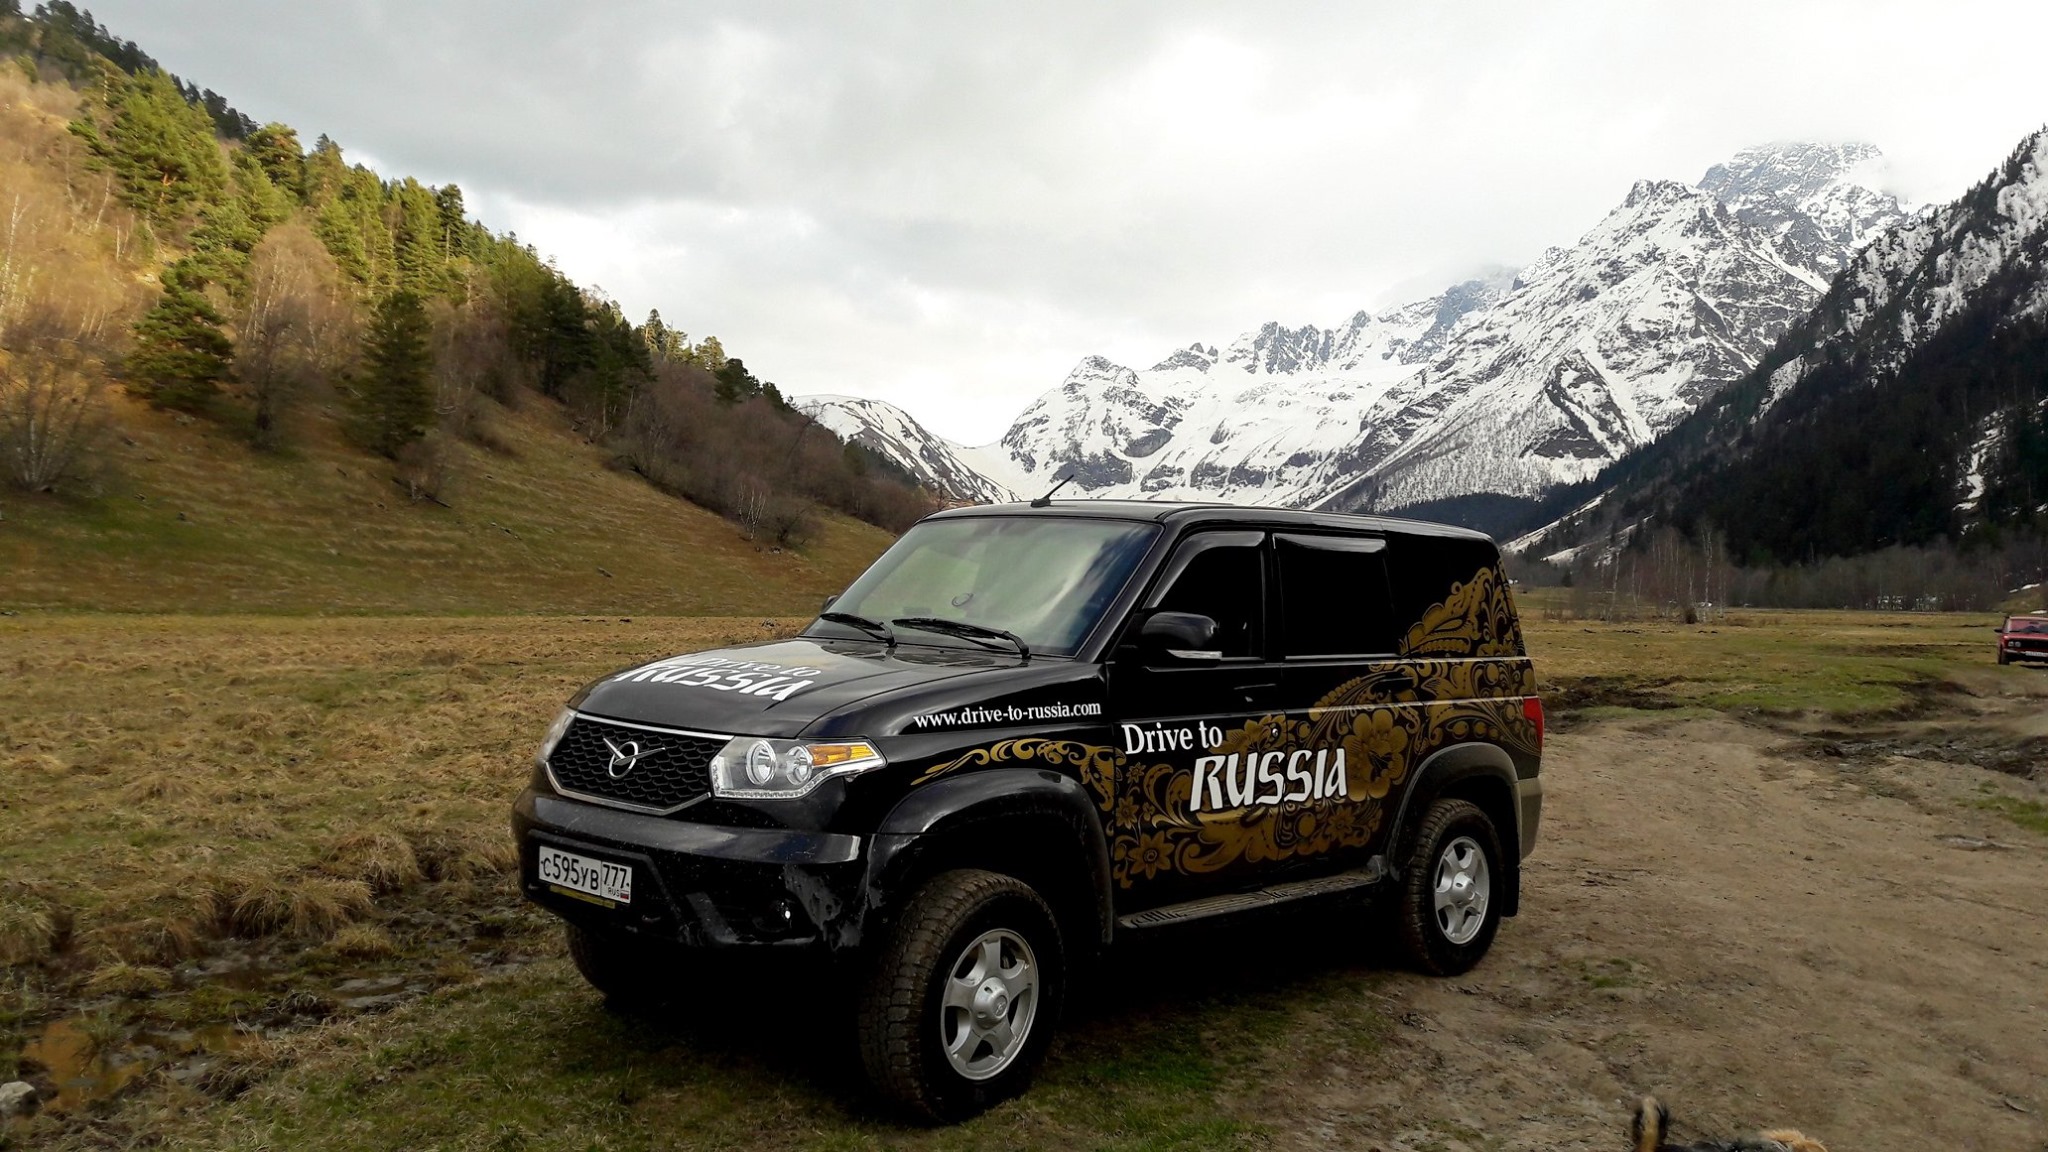 Read about all our Caucasus Adventures: